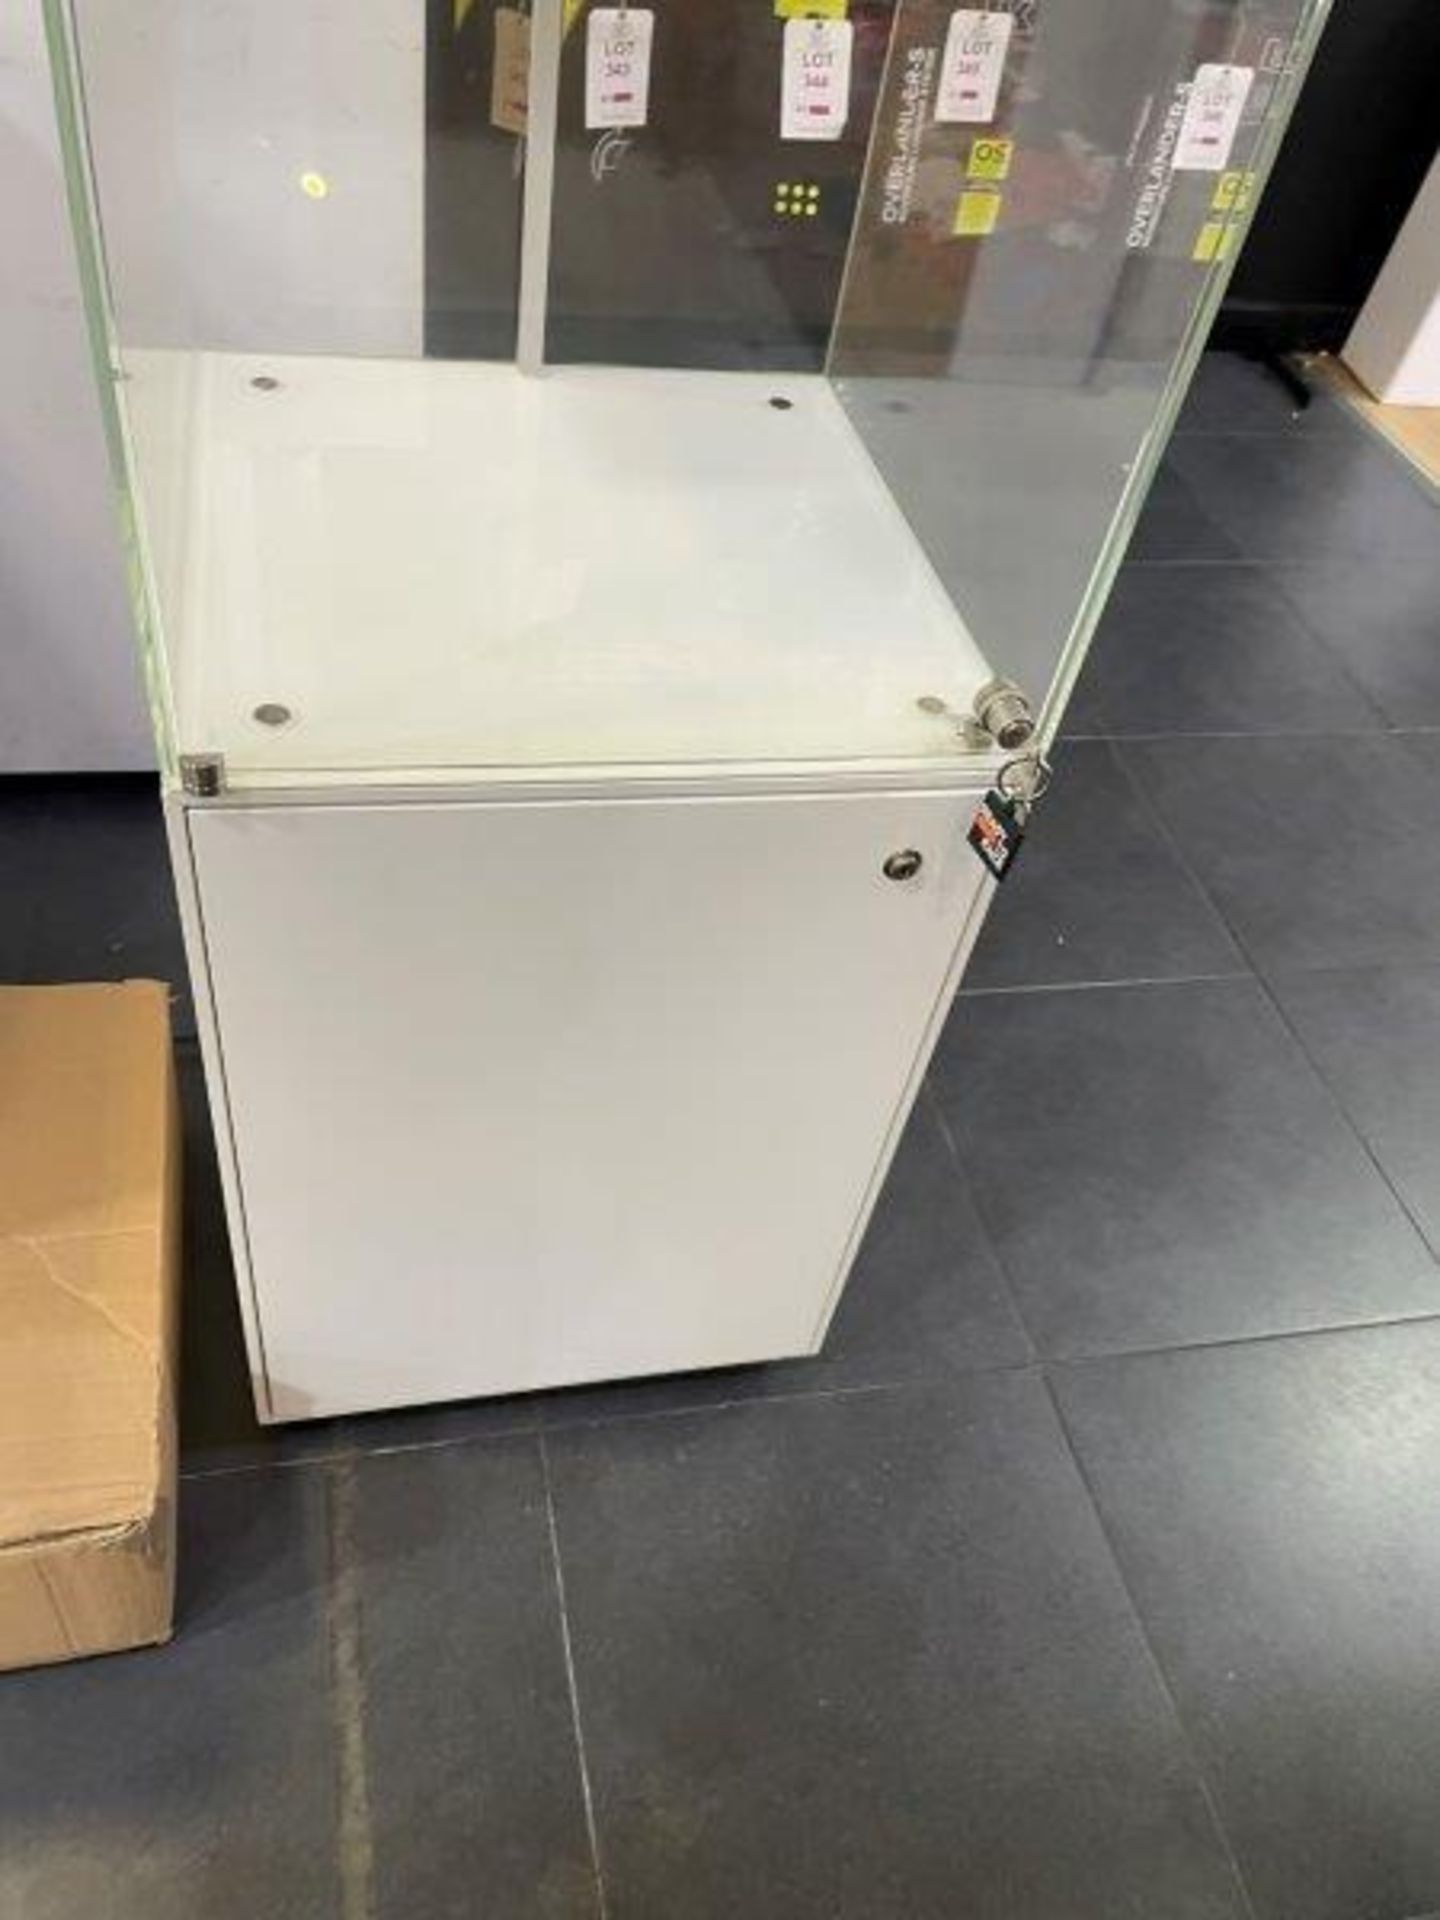 2 x 3 Tier Glass Display Cabinets with Storage in Base - Image 4 of 6